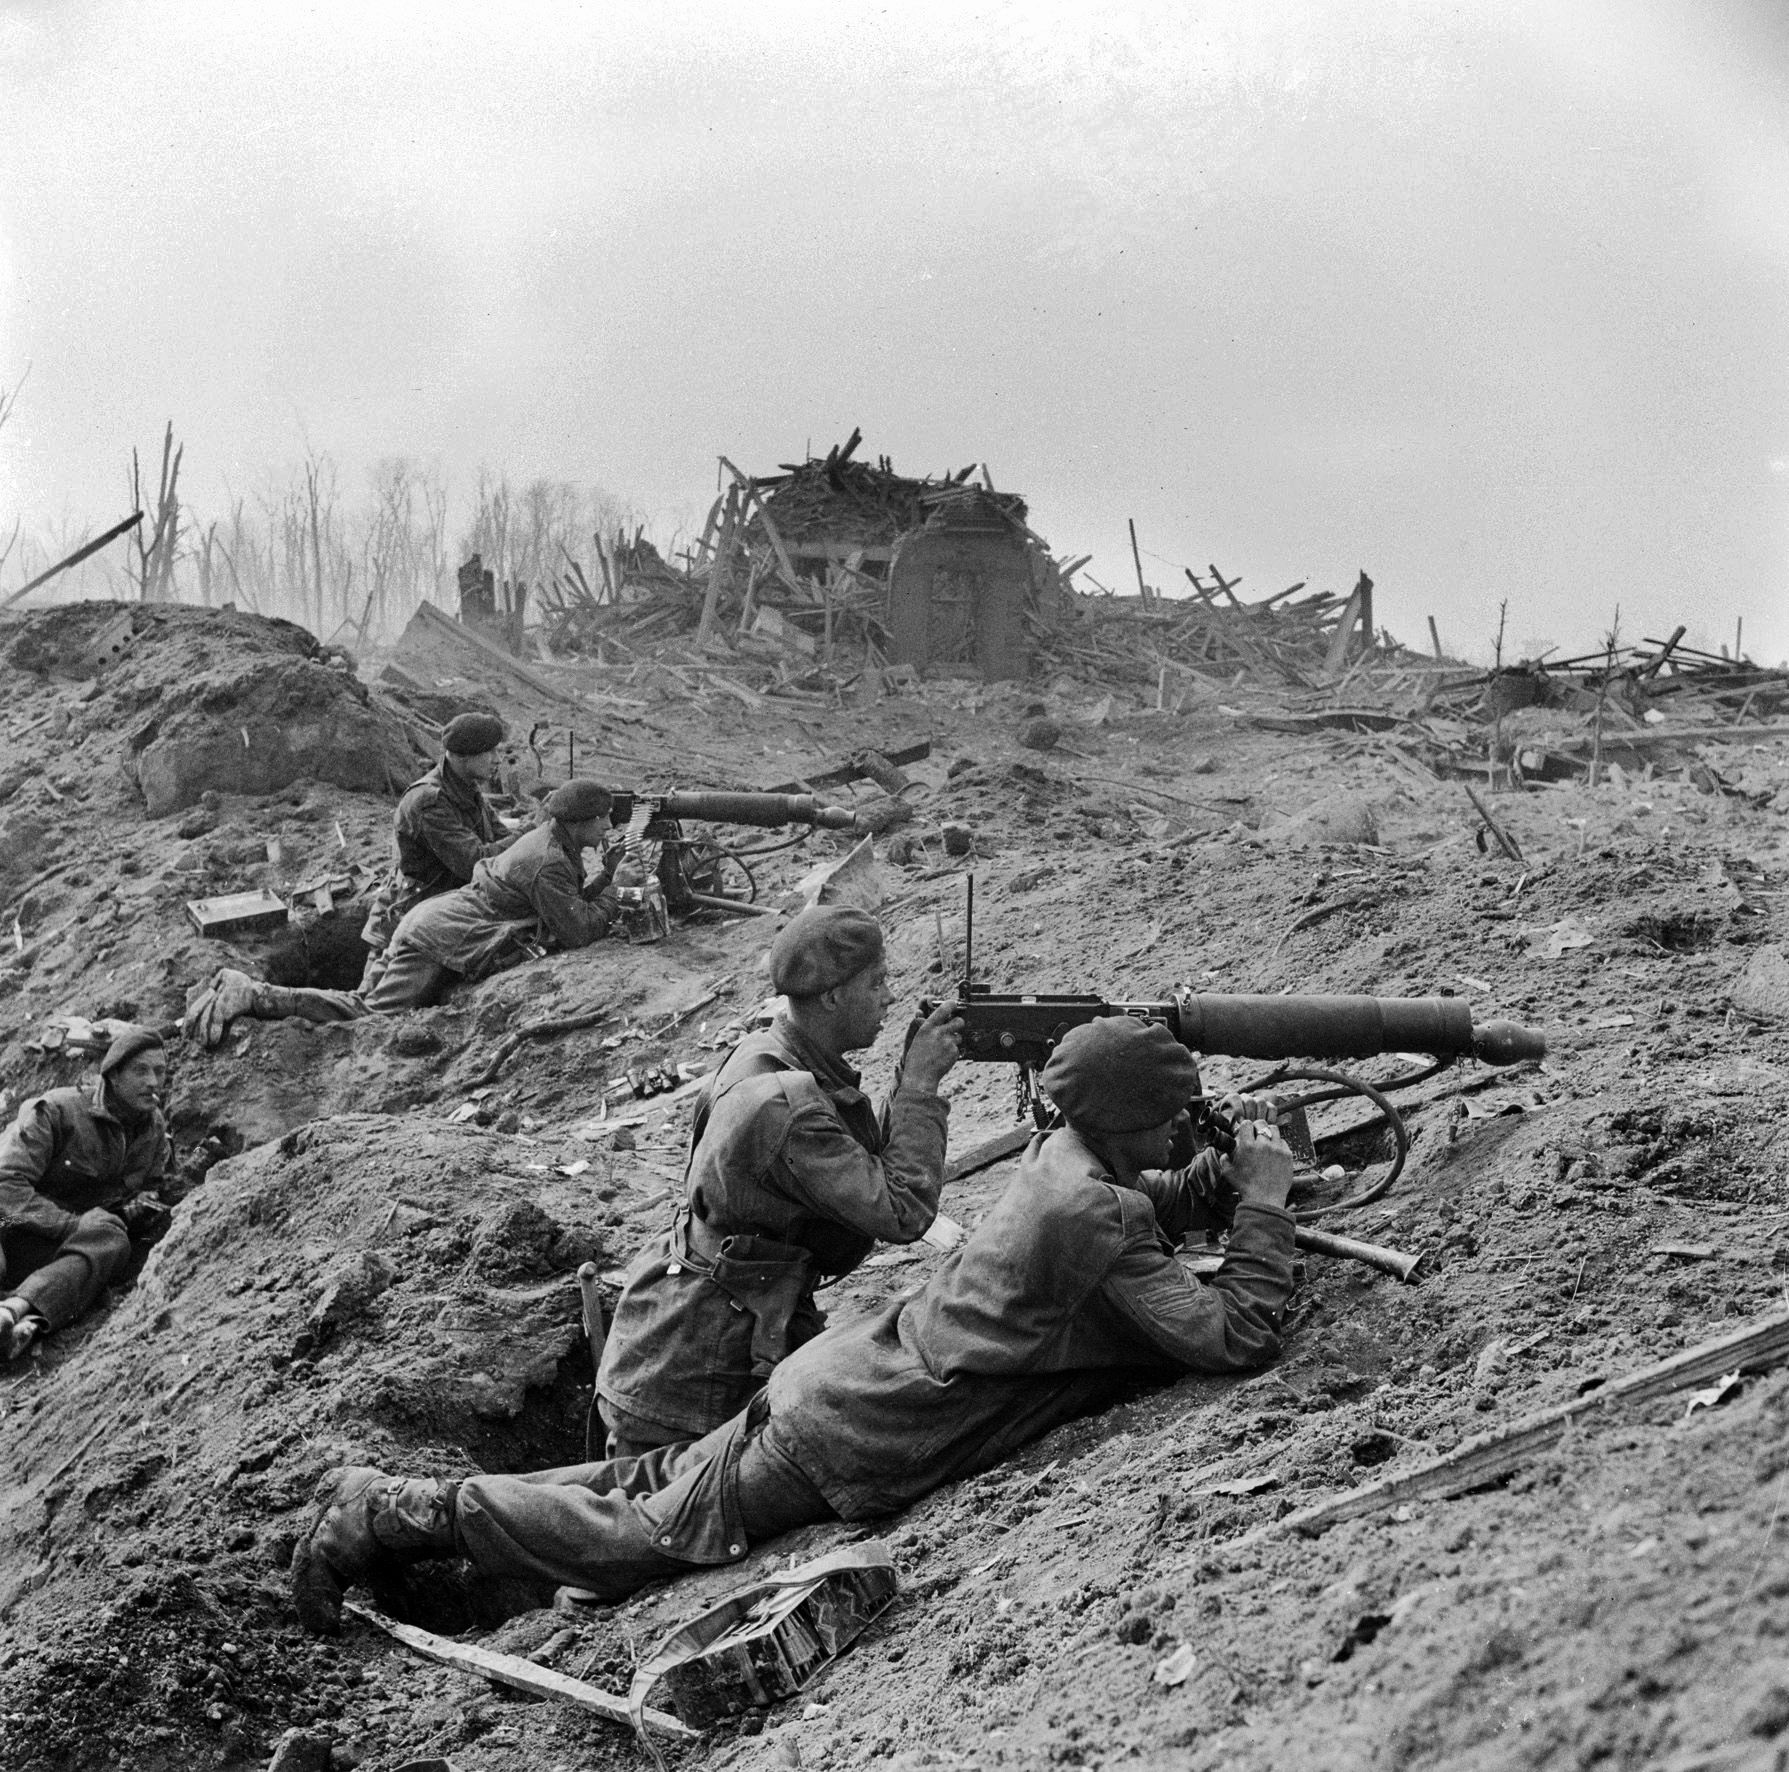 Members of 1st Commando Brigade man two Vickers machine guns in the shattered outskirts of Wesel. The 1st Commandos spearheaded the British assault by making a surprise crossing in assault craft on the night of March 23-24, 1945.